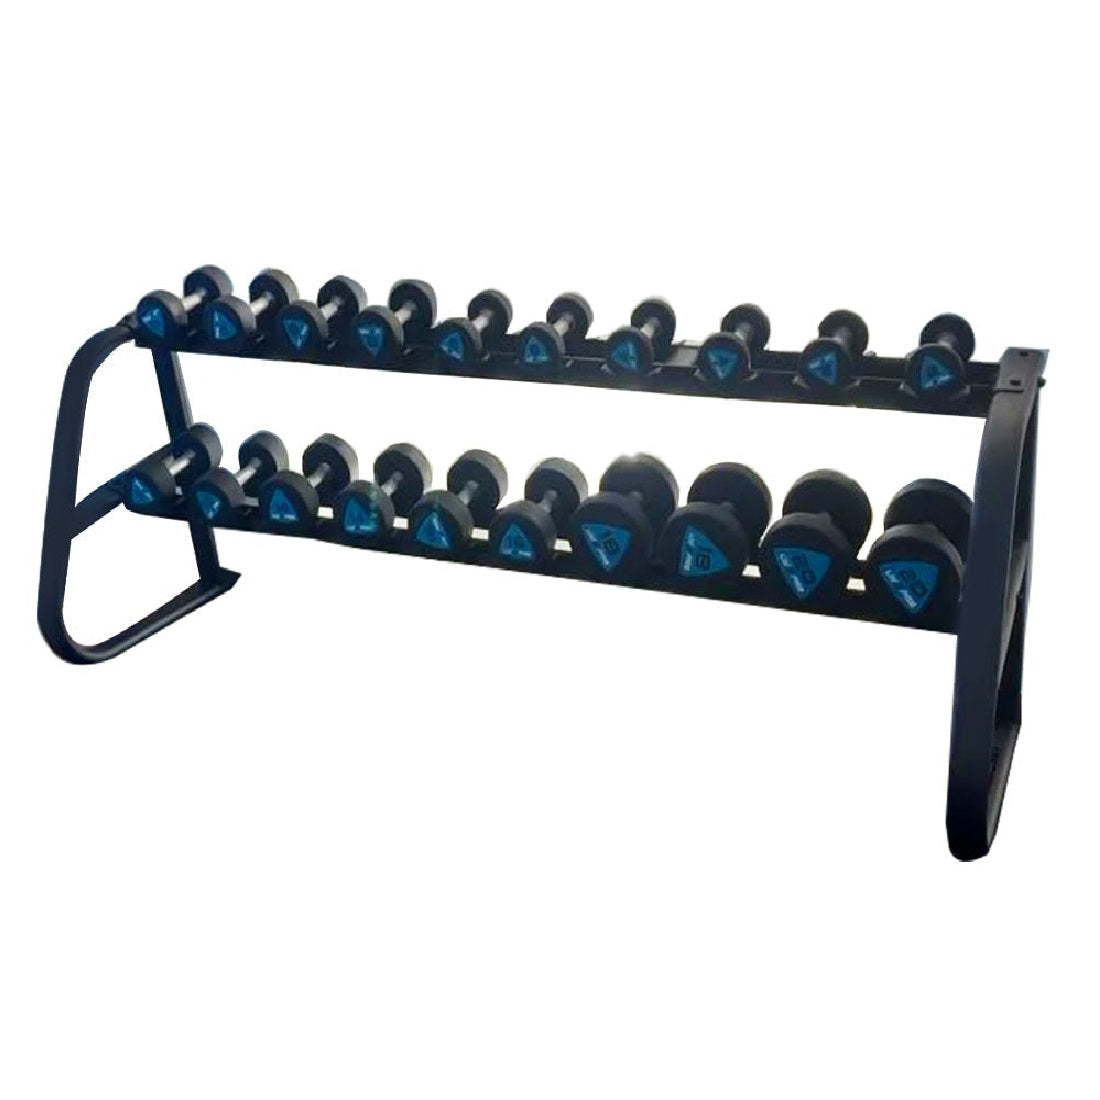 Dumbbell Set with 2 Tier Rack